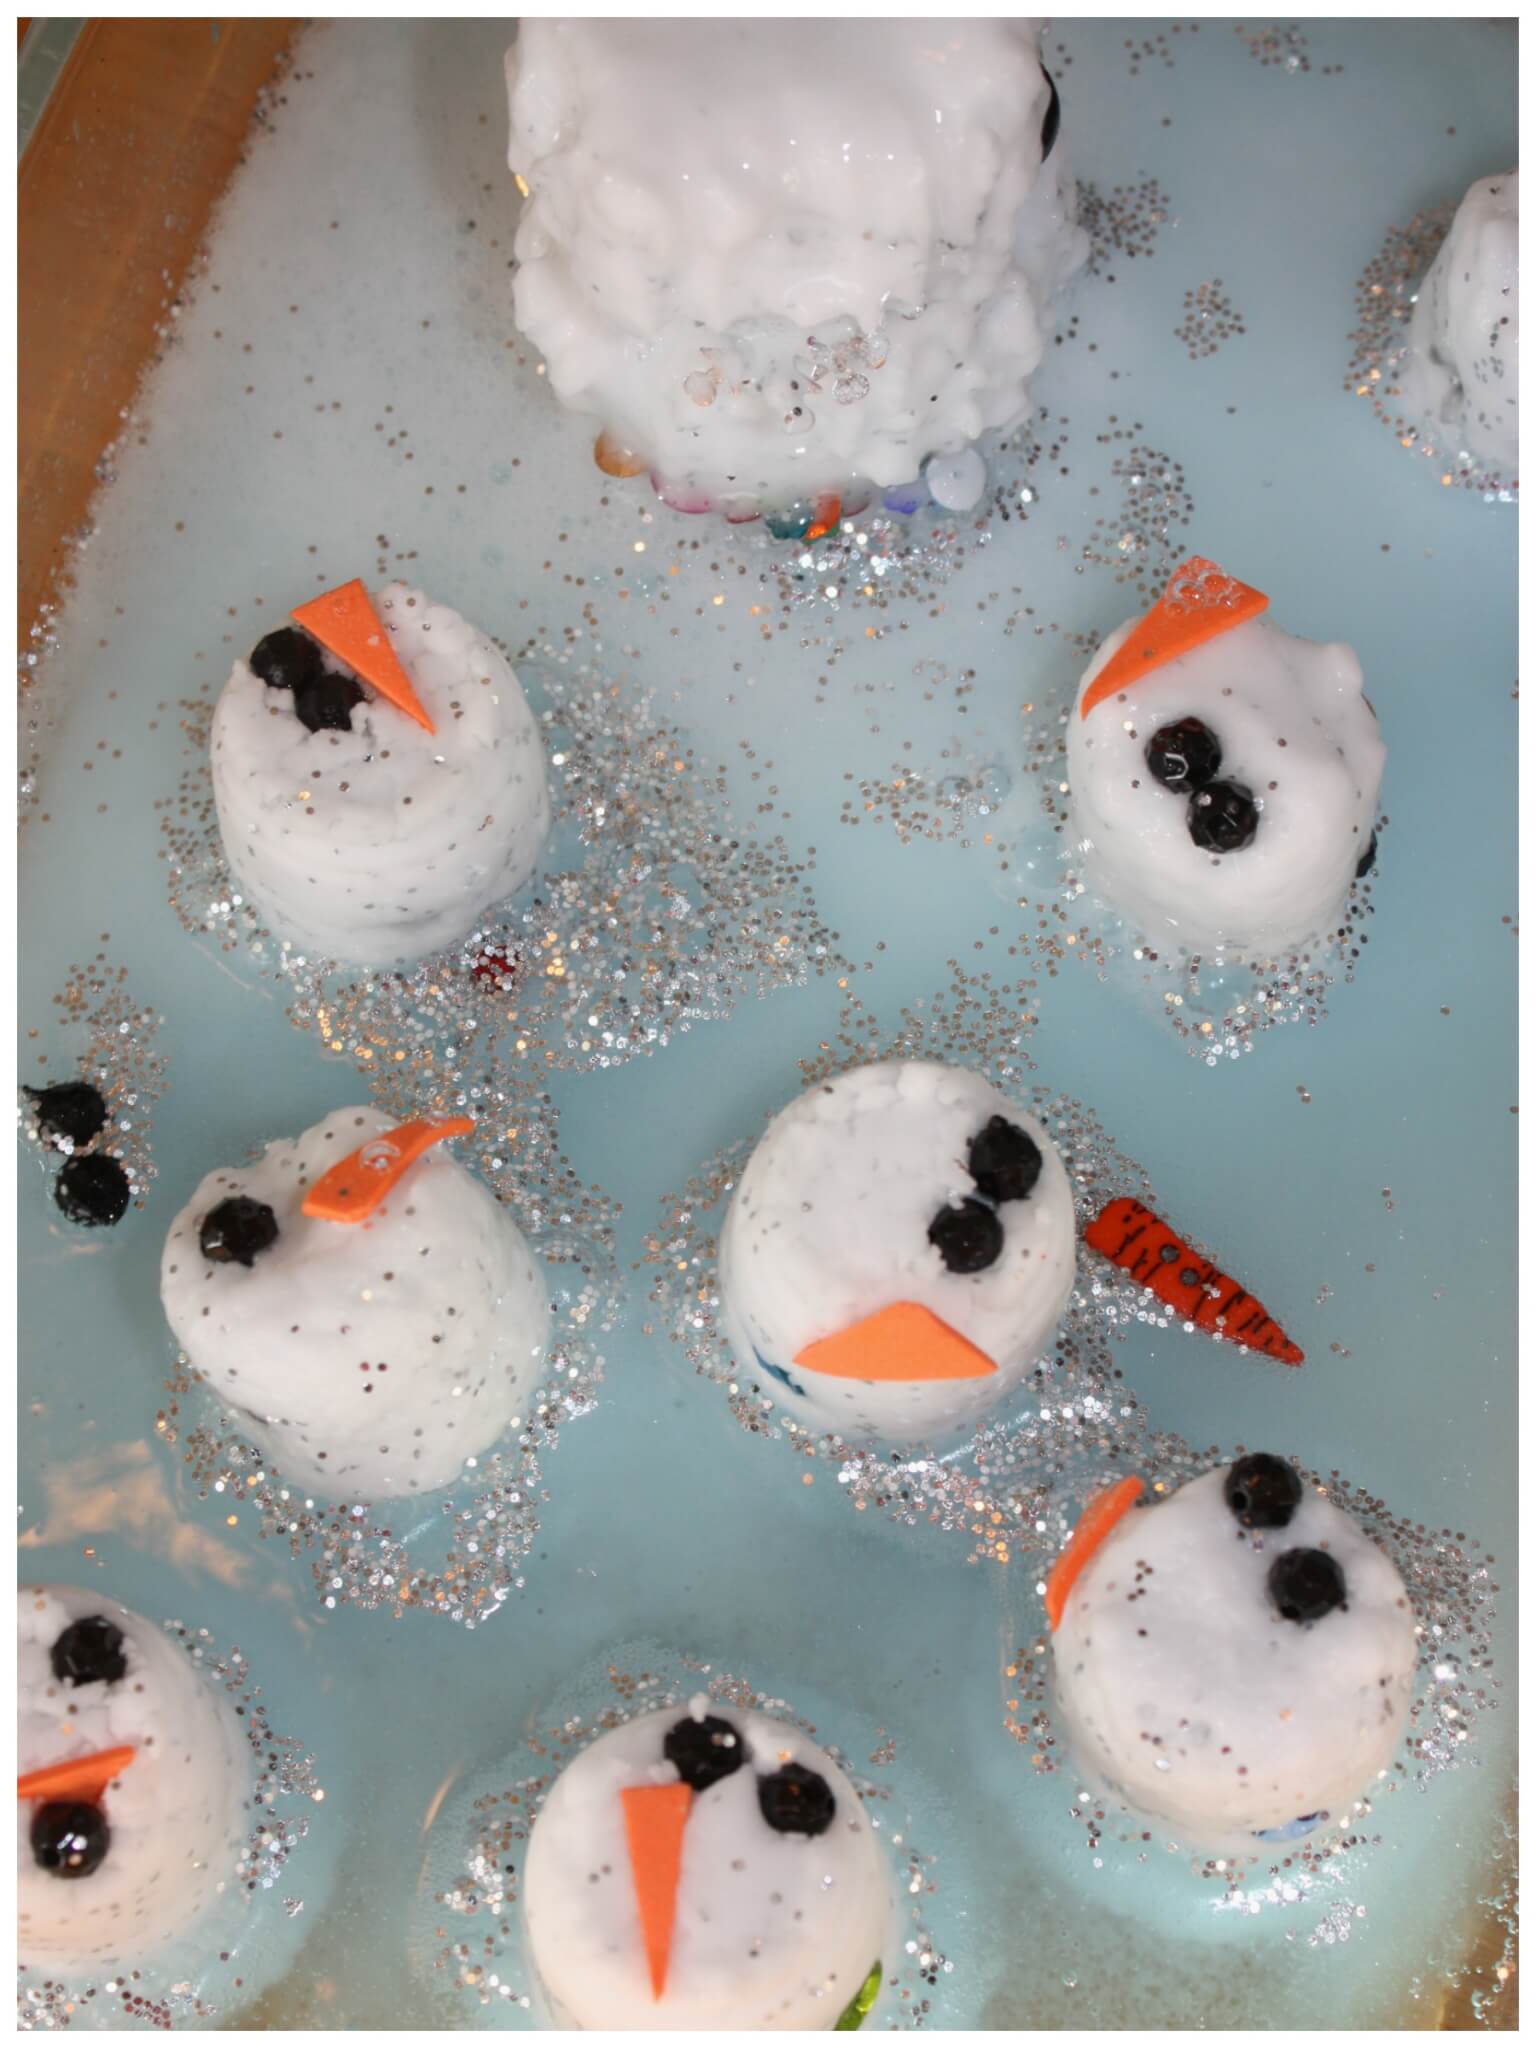 snowman-baking-soda-science-experiment-and-winter-activity-for-kids